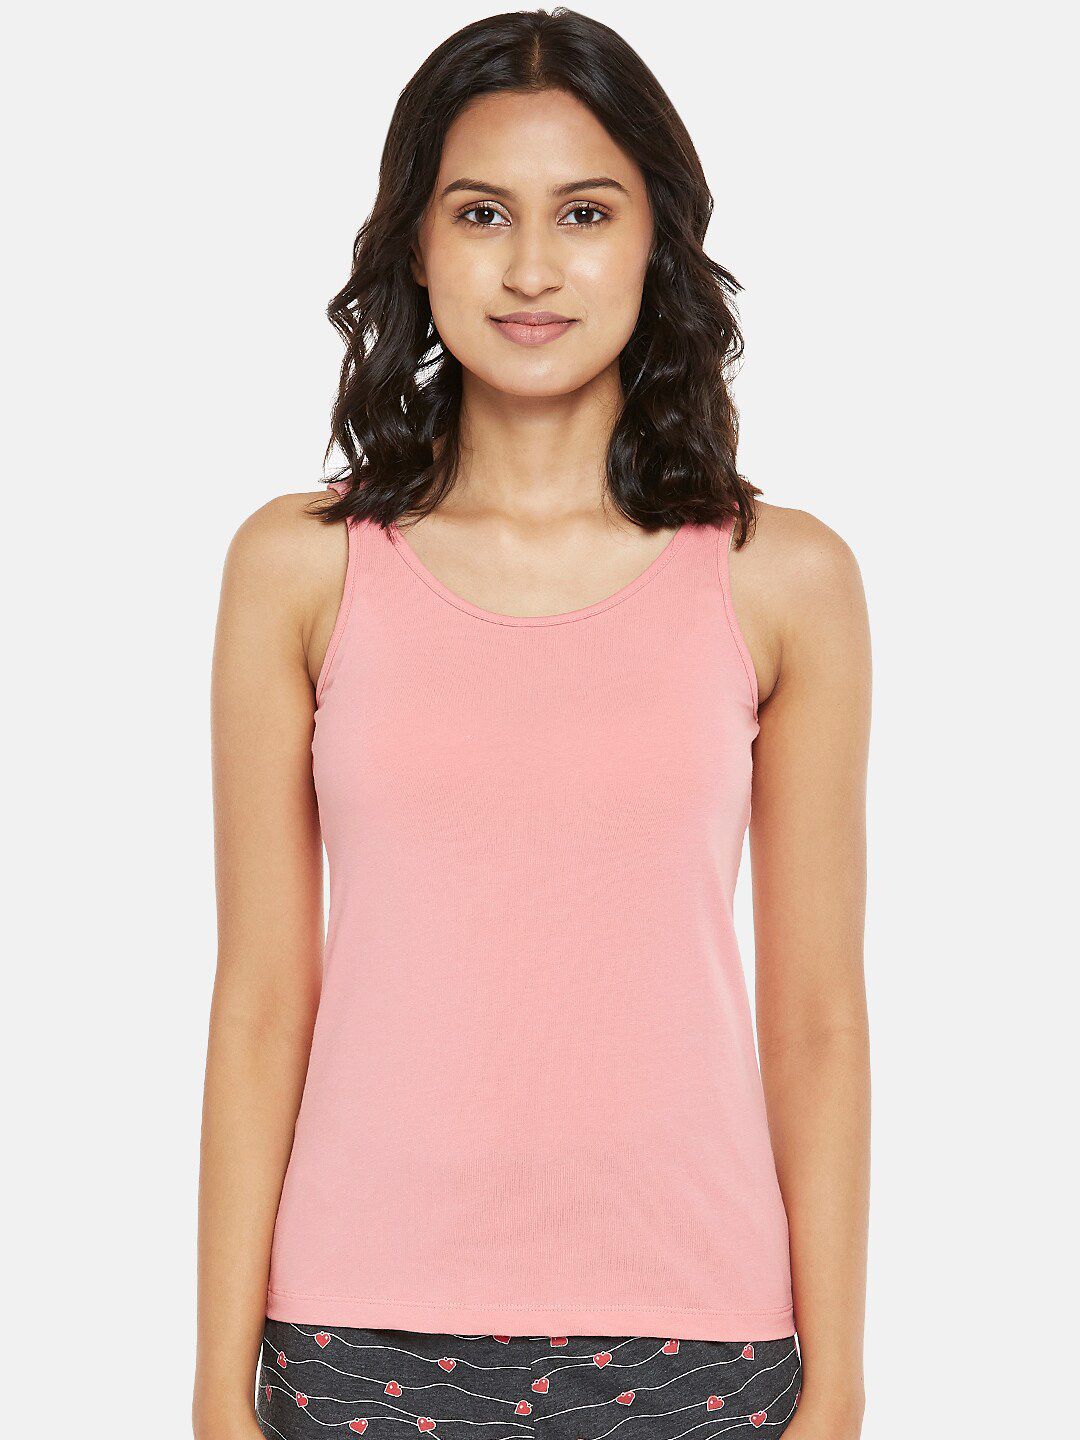 Dreamz by Pantaloons Pink Tank Lounge tshirt Price in India